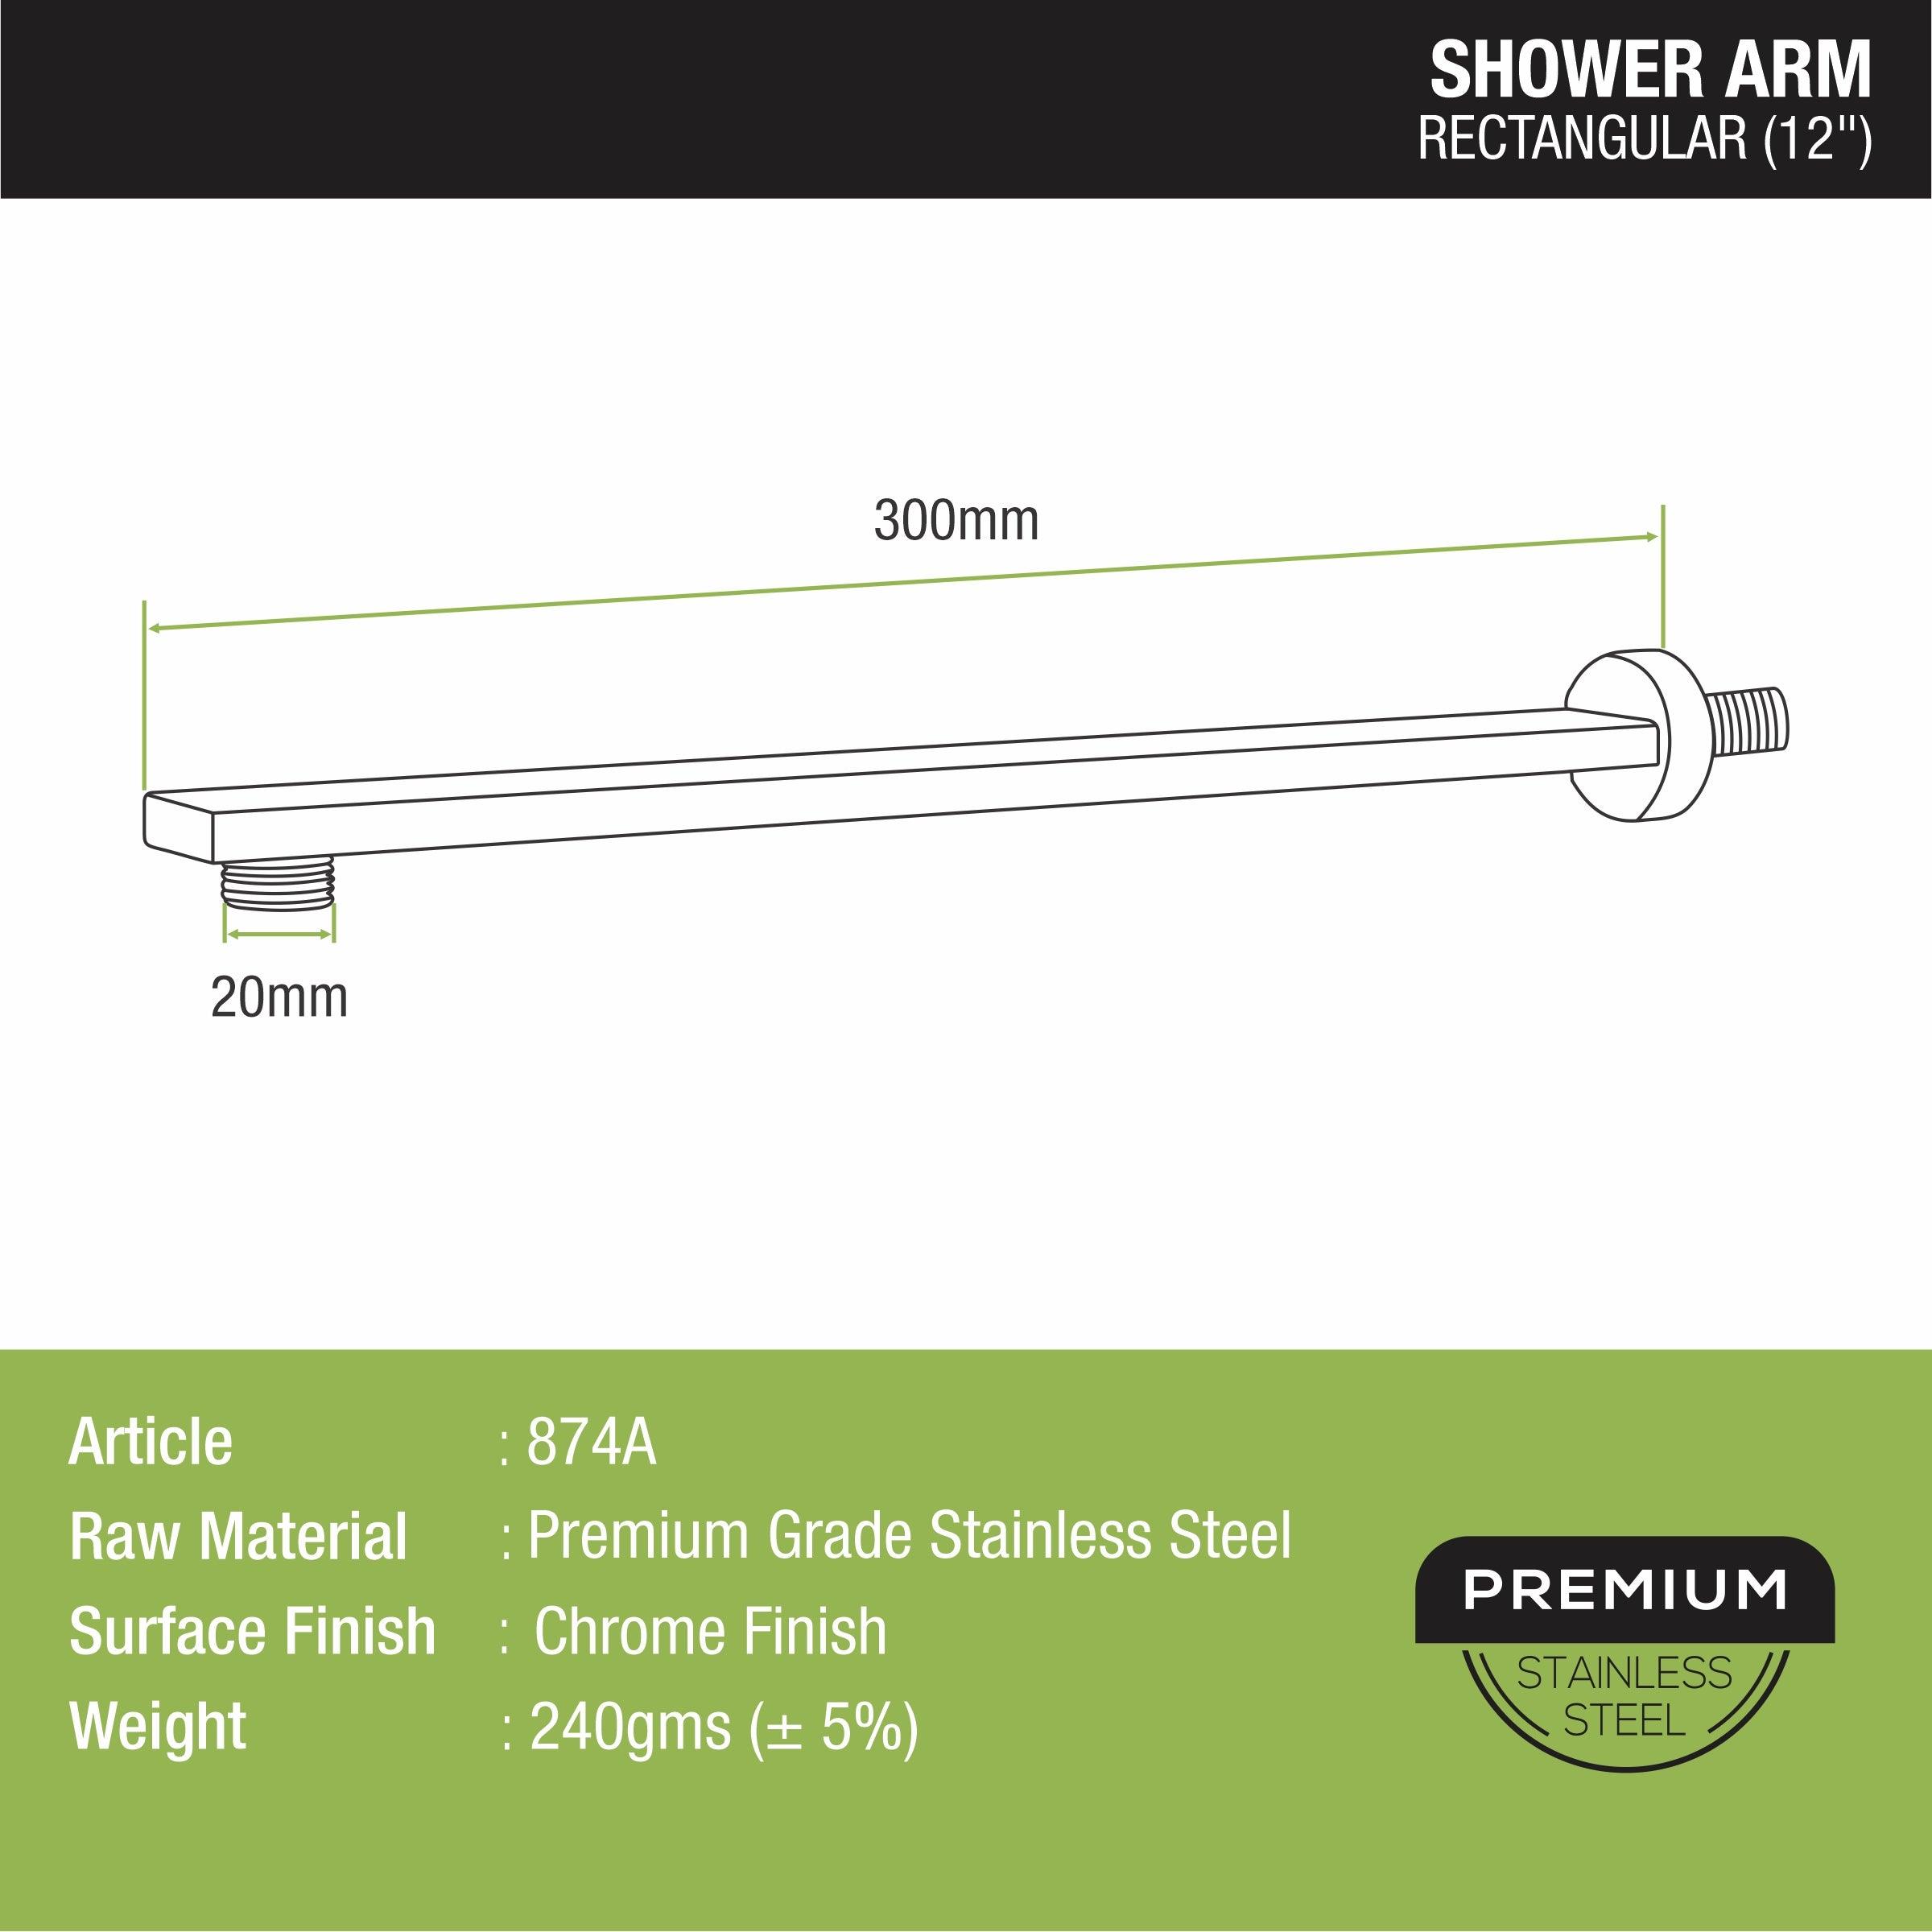 Rectangular Shower Arm (12 Inches) sizes and dimensions